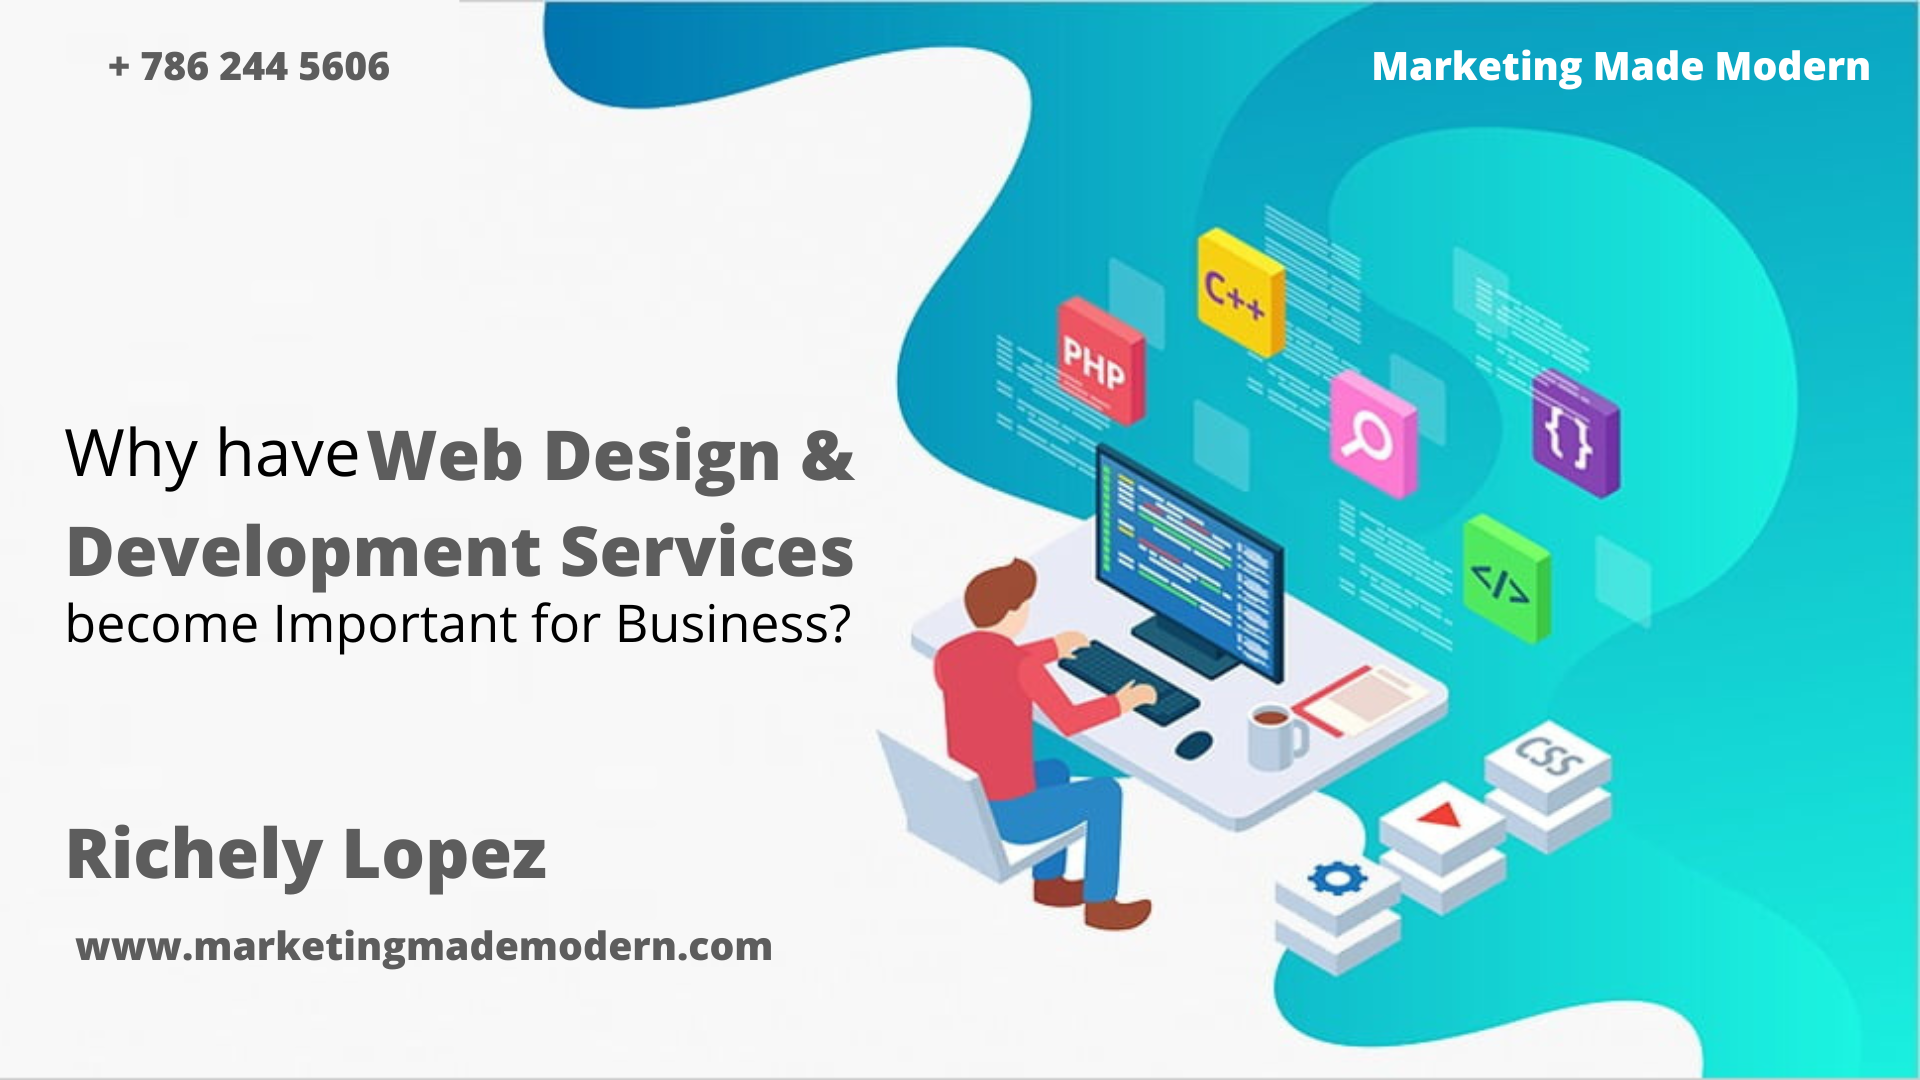 Why have Web Design & Development Services become Important for Business?